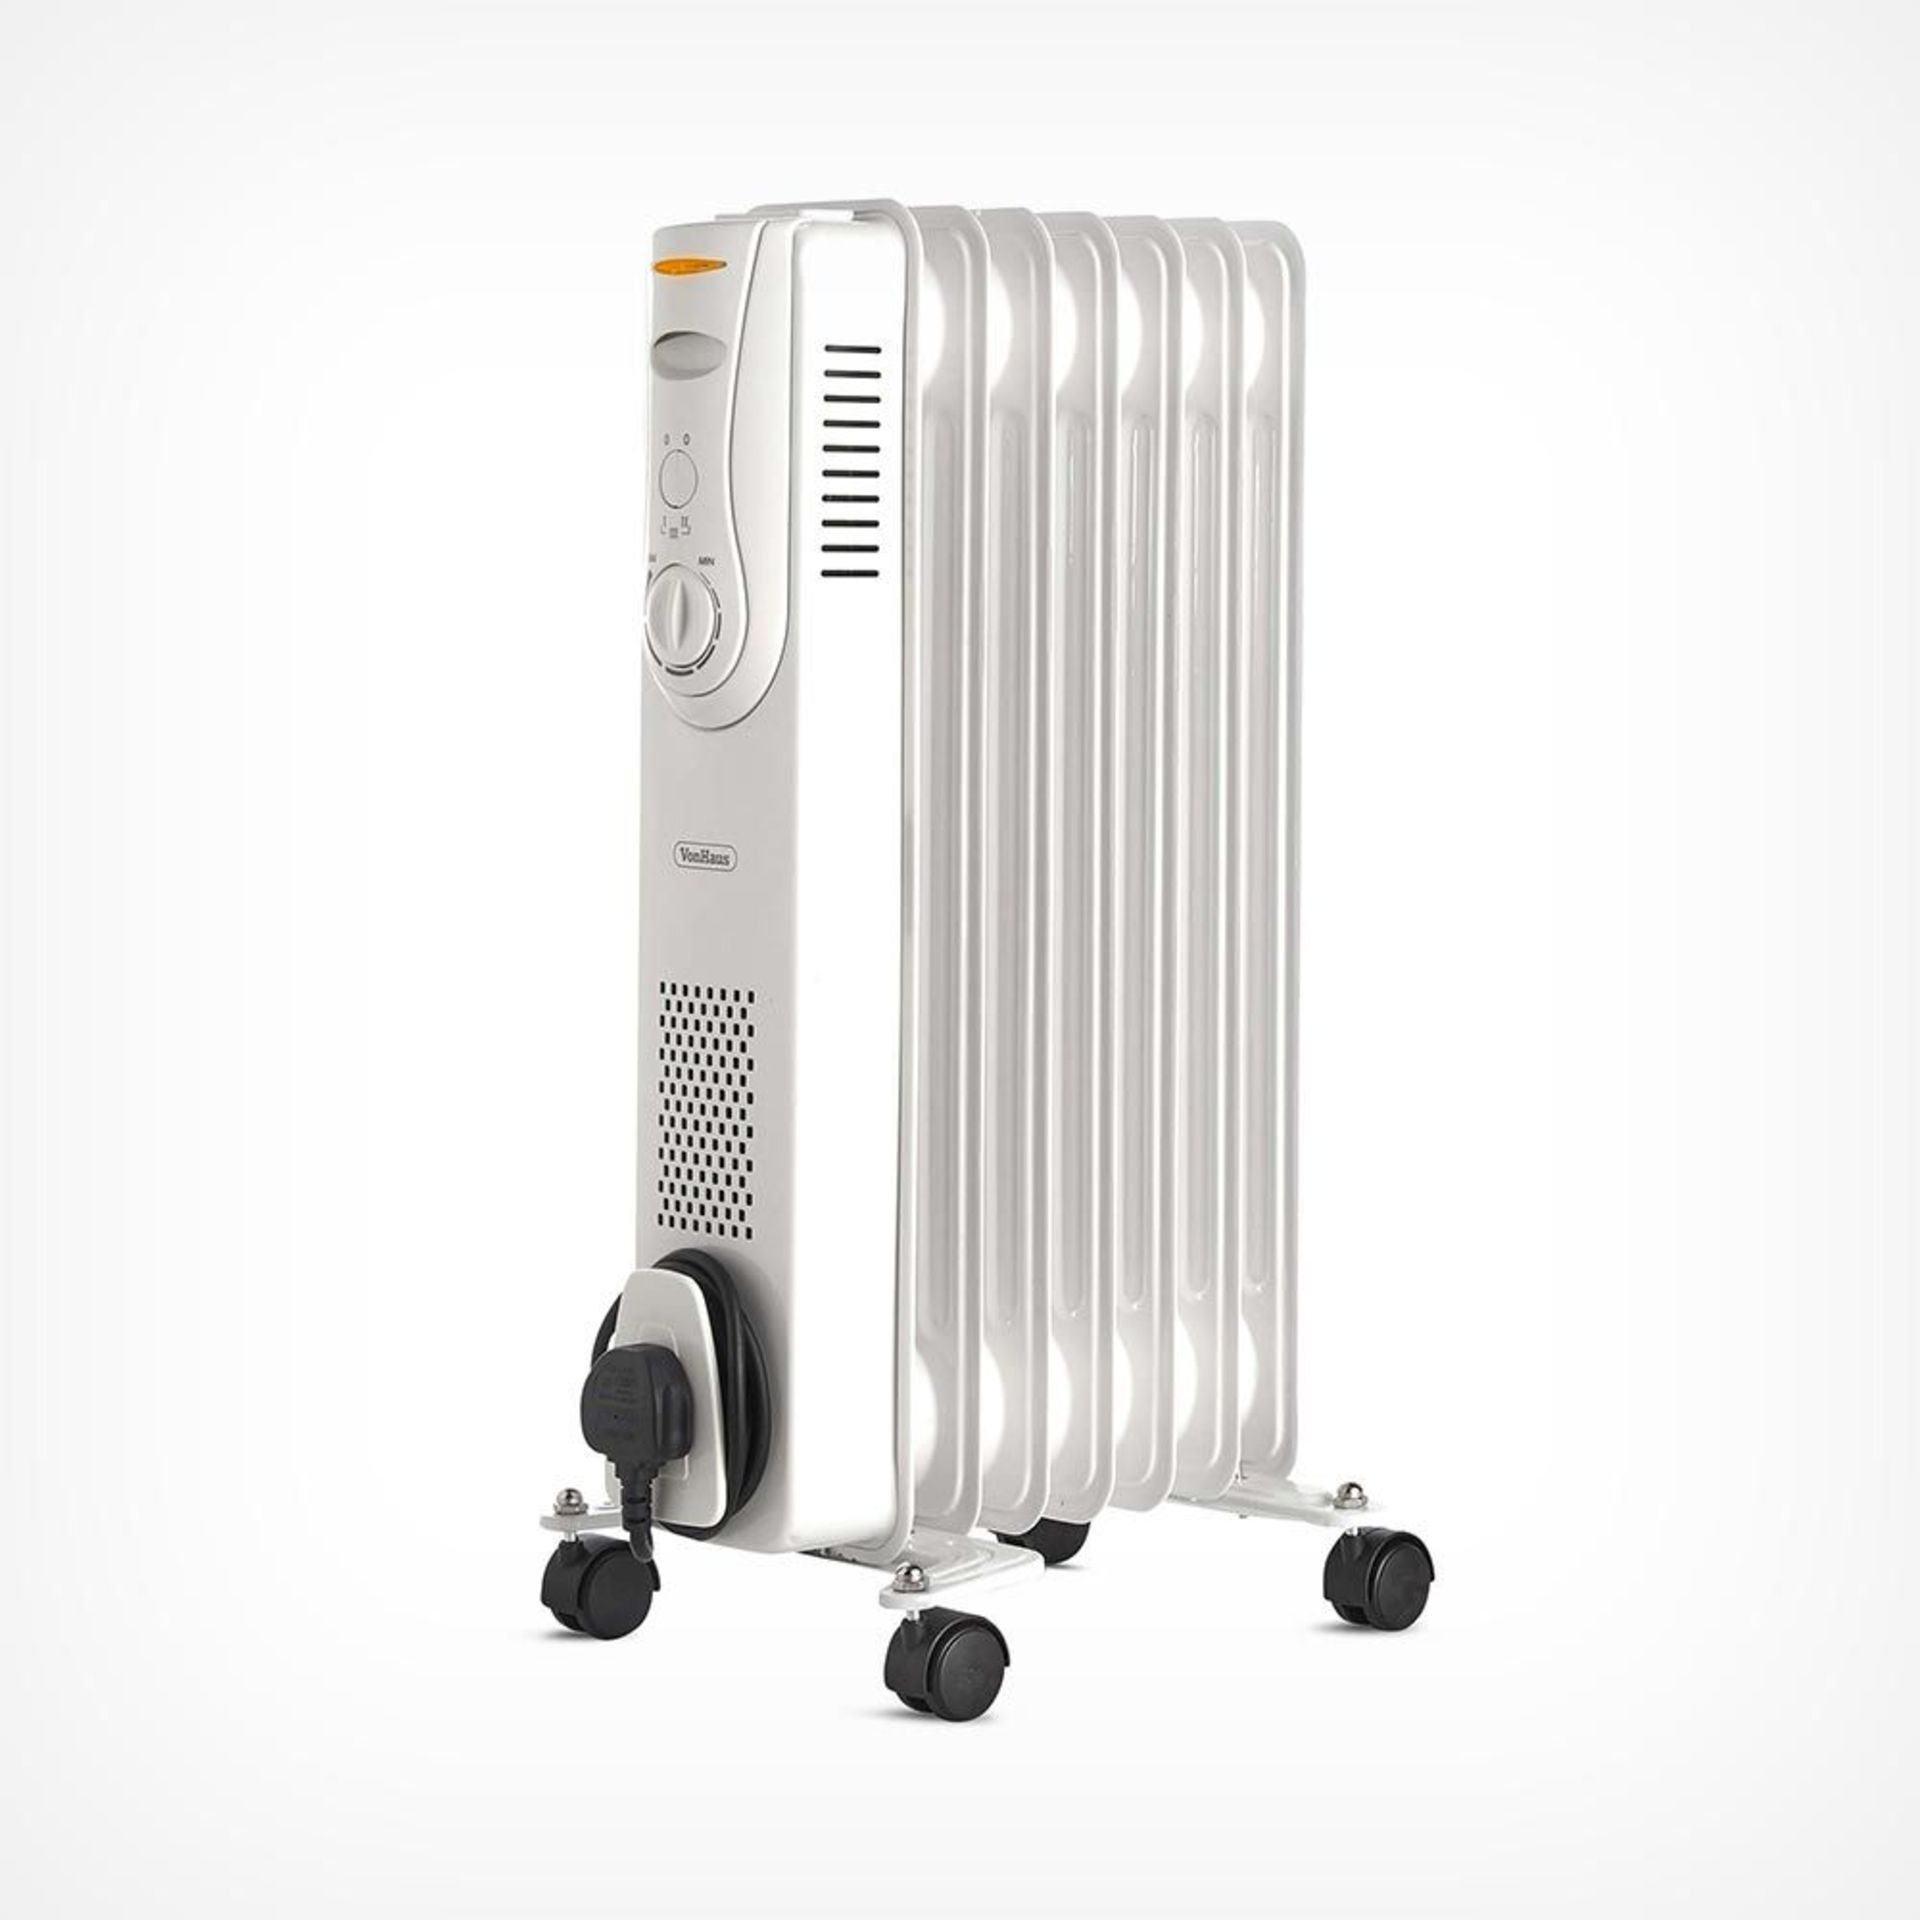 (H135) 7 Fin 1500W Oil Filled Radiator - White Powerful 1500W radiator with 7 oil-filled fins ... - Image 2 of 3